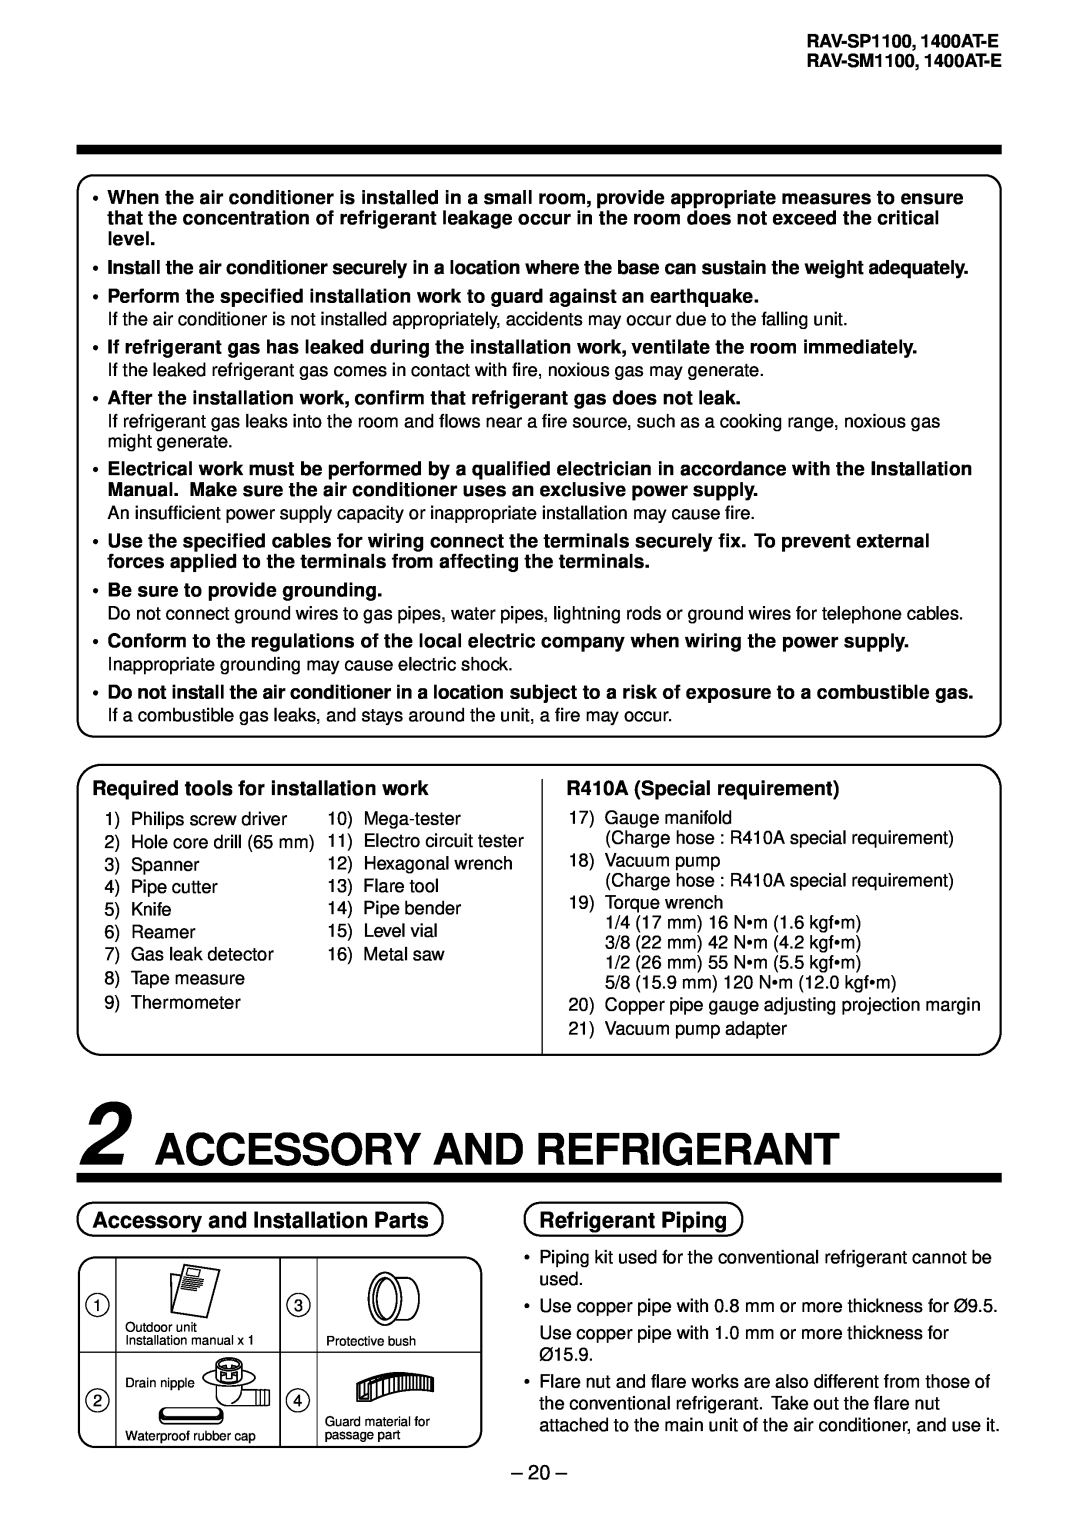 Balcar Accessory And Refrigerant, Accessory and Installation Parts, Refrigerant Piping, R410A Special requirement, 20 